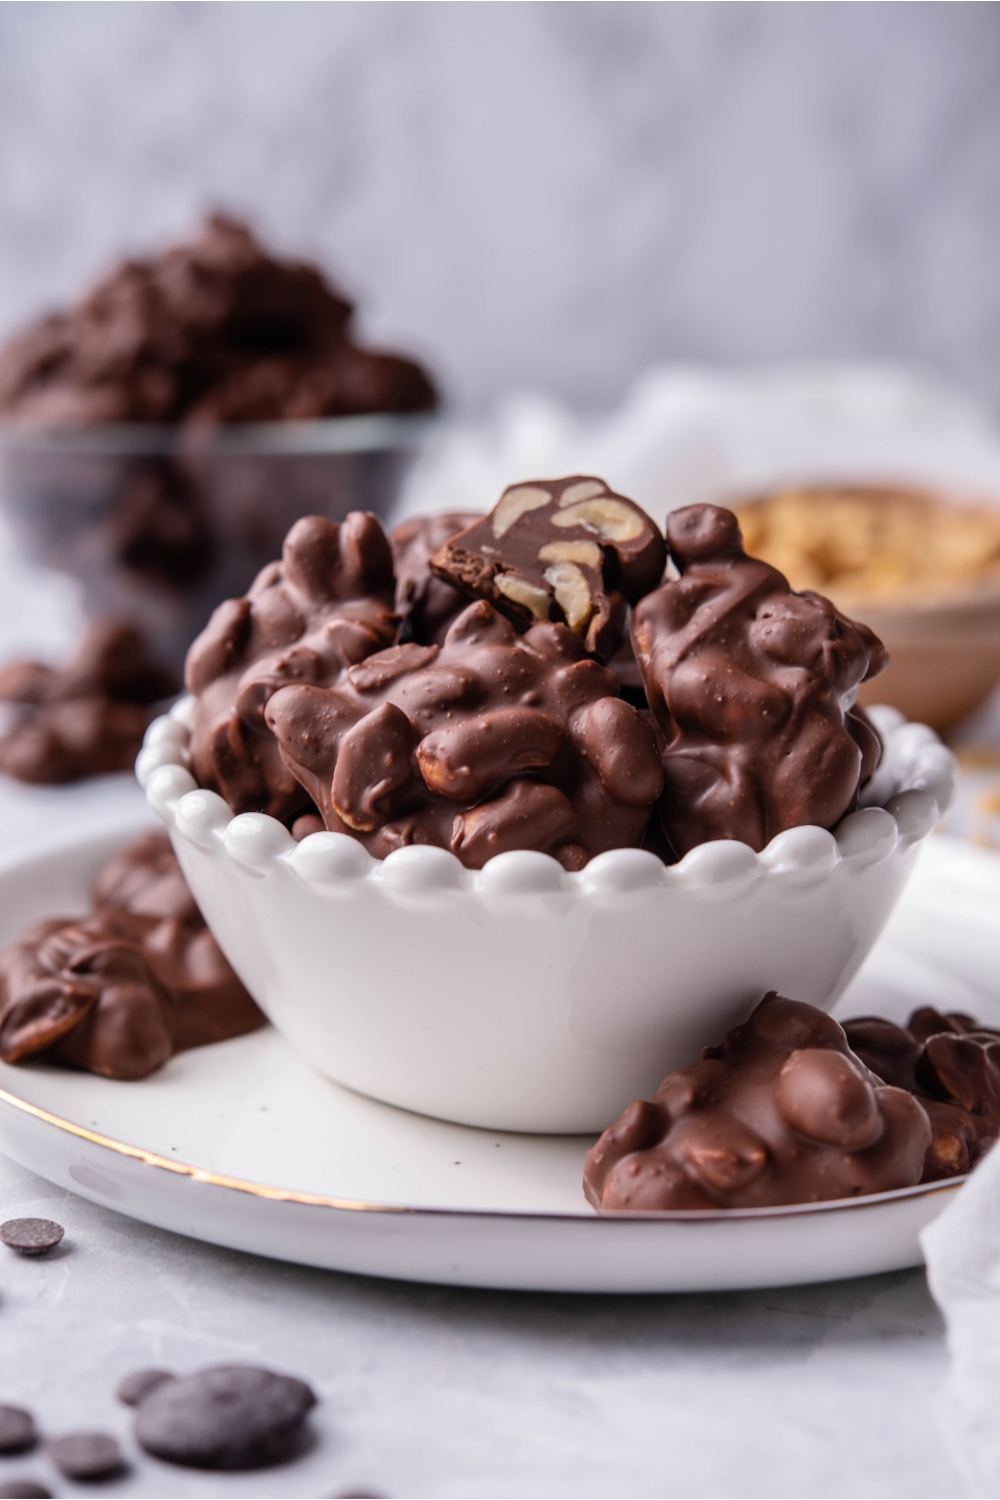 Crock pot chocolate peanut clusters piled in a white serving bowl with a one cluster cut in half and some pieces spilling out on the plate below. In the background is another bowl of peanut clusters and a bowl of peanuts.